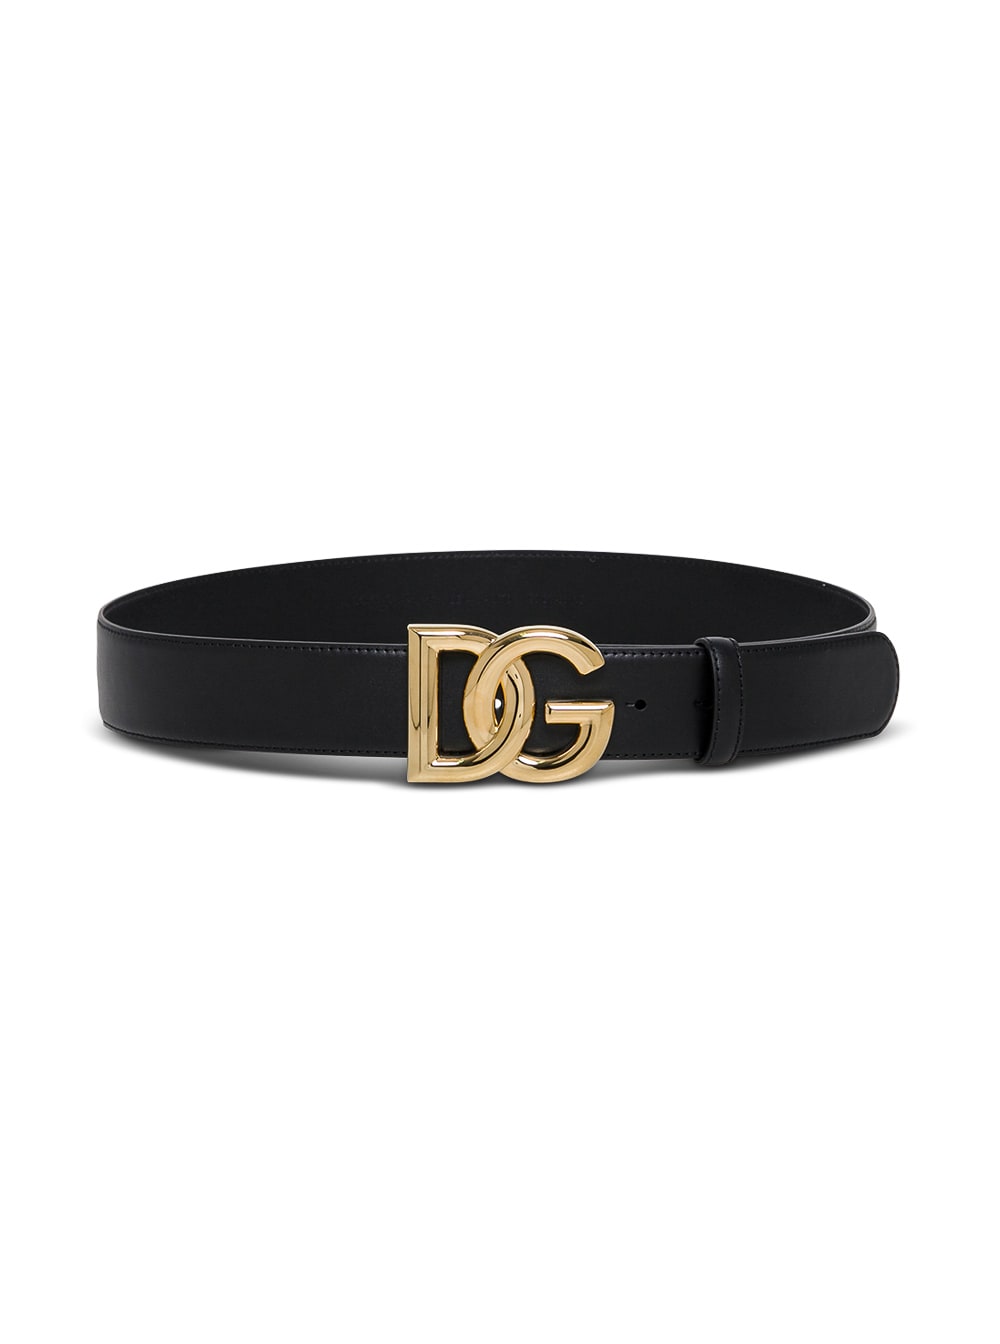 Dolce & Gabbana Woman s Black Leather Belt With Logo Buckle